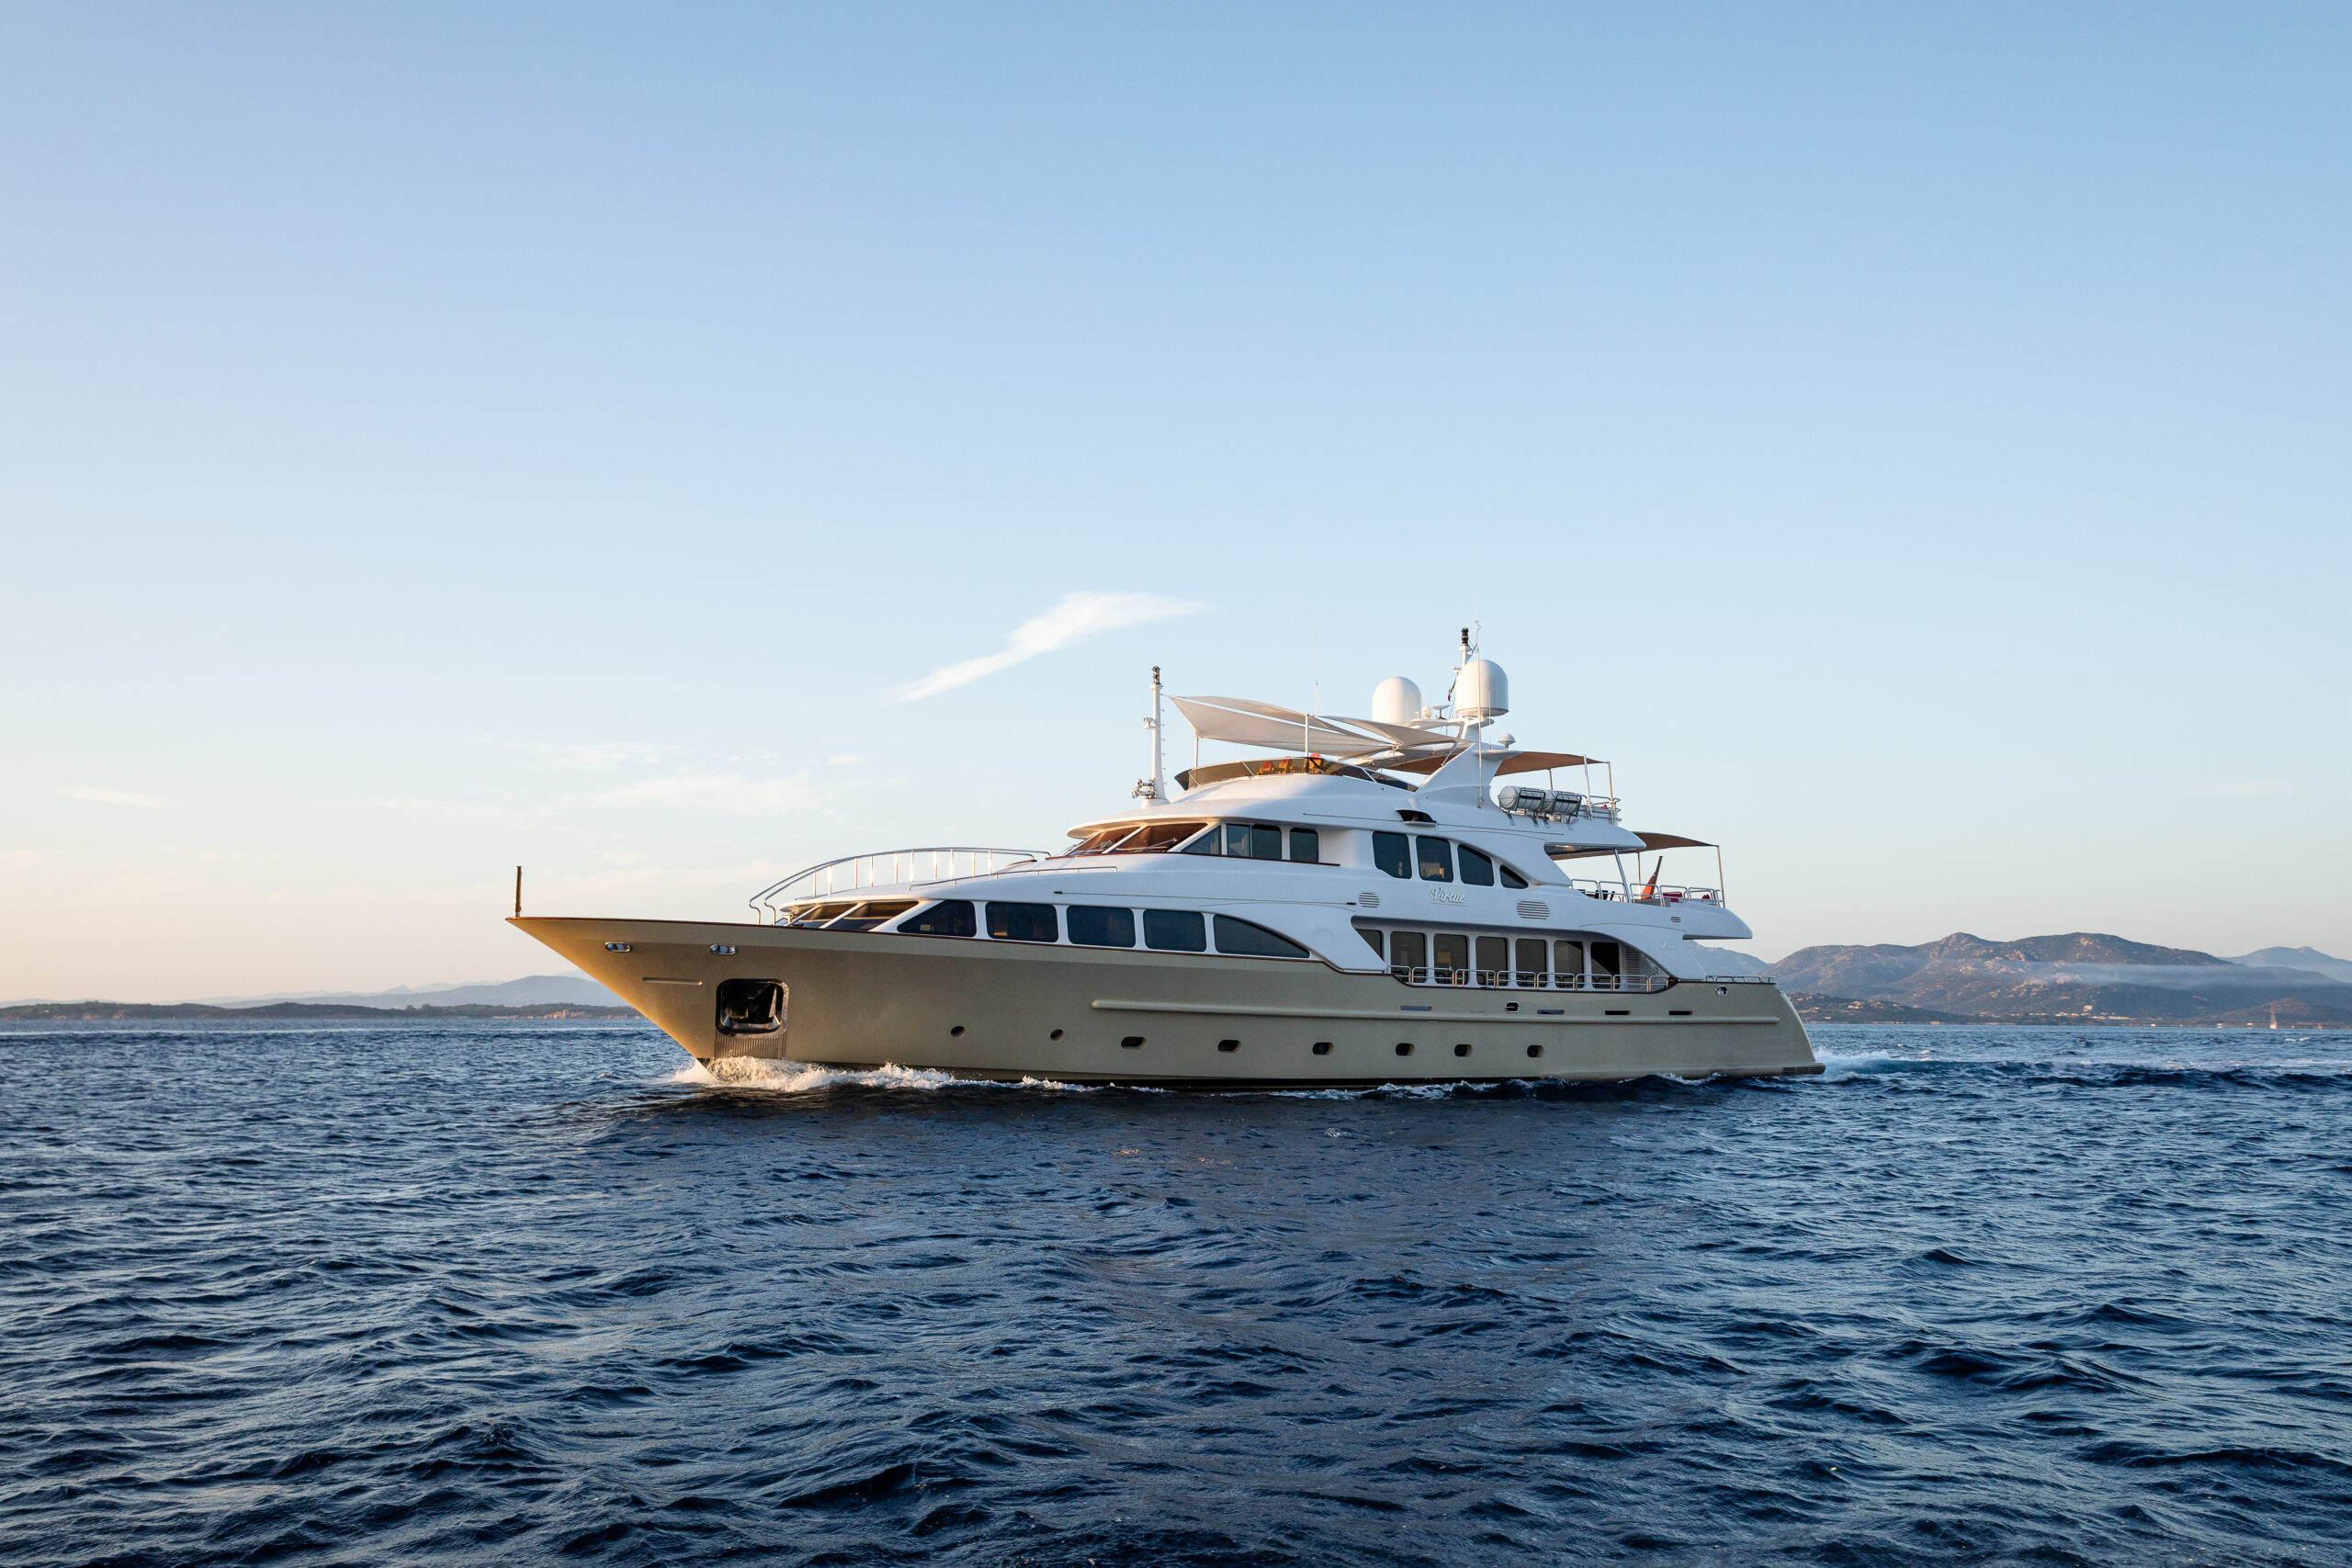 VIRTUE is the perfect vessel for your next charter voyage